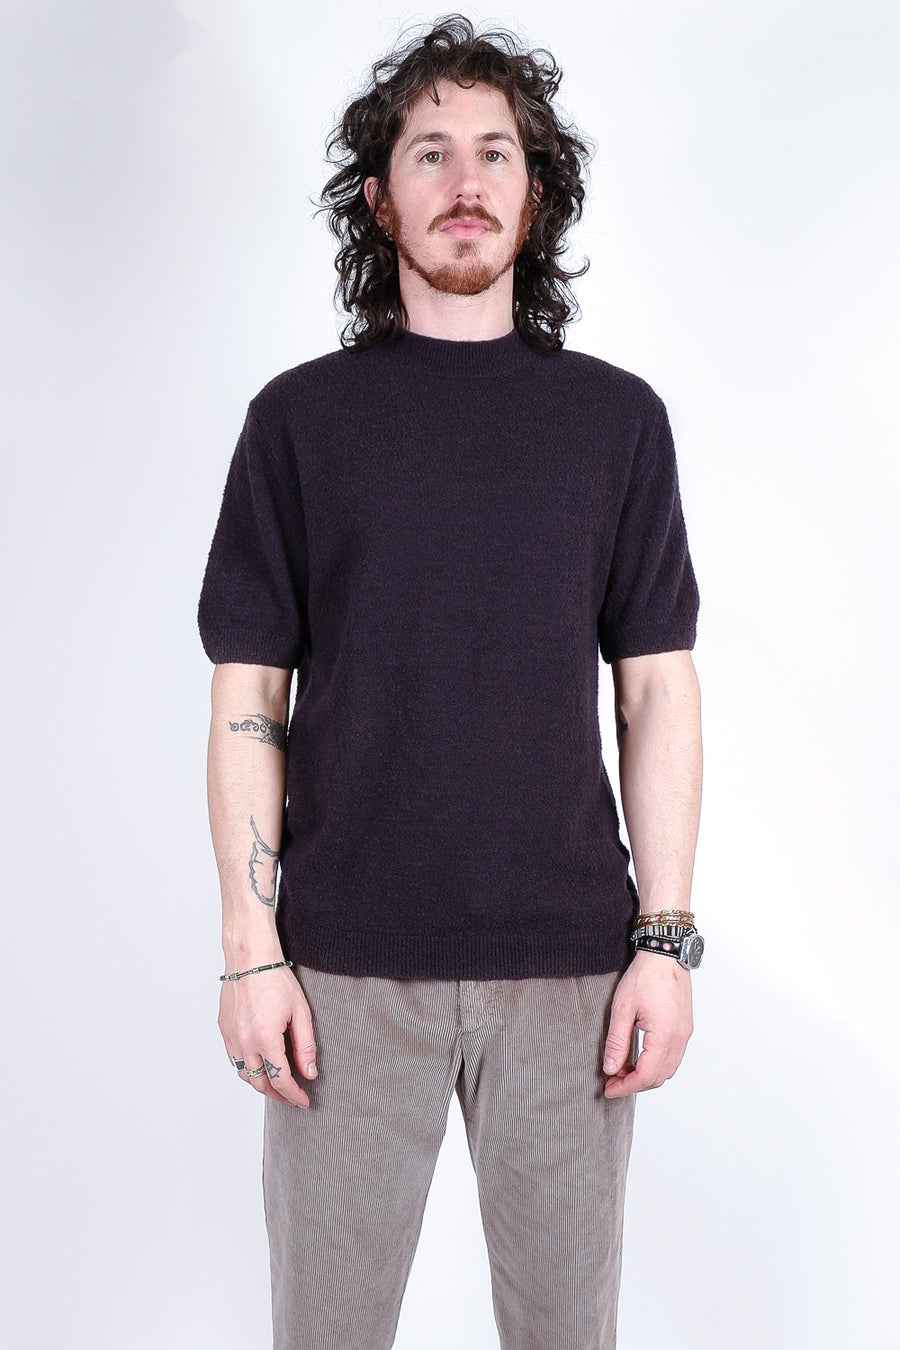 Buy the Daniele Fiesoli Boiled Wool Turtle Neck S/S T-Shirt in Charcoal at Intro. Spend £50 for free UK delivery. Official stockists. We ship worldwide.